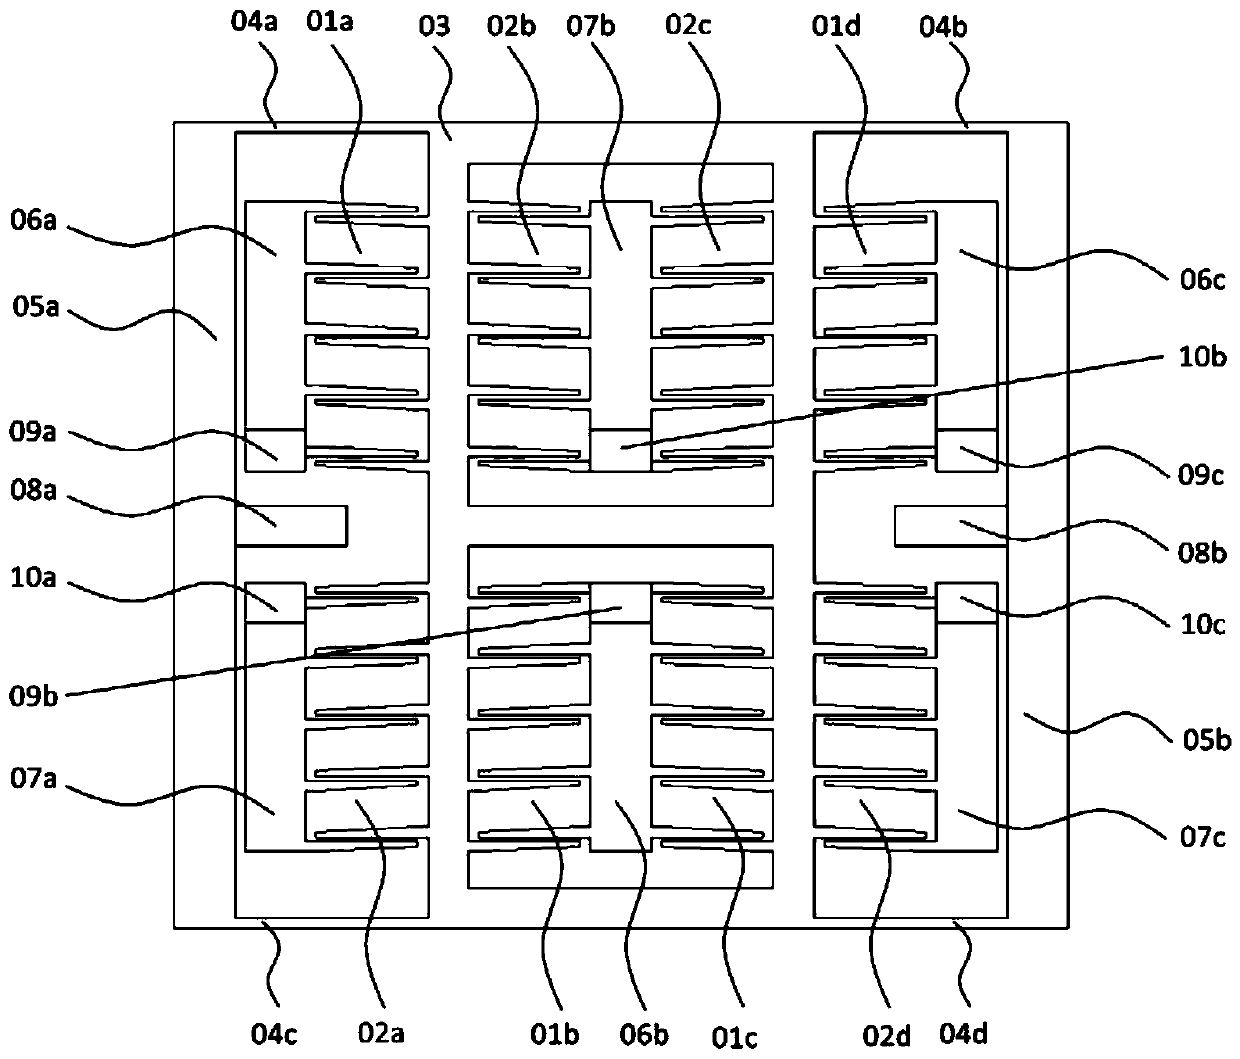 Comb tooth capacitive micro-electromechanical accelerometer structure